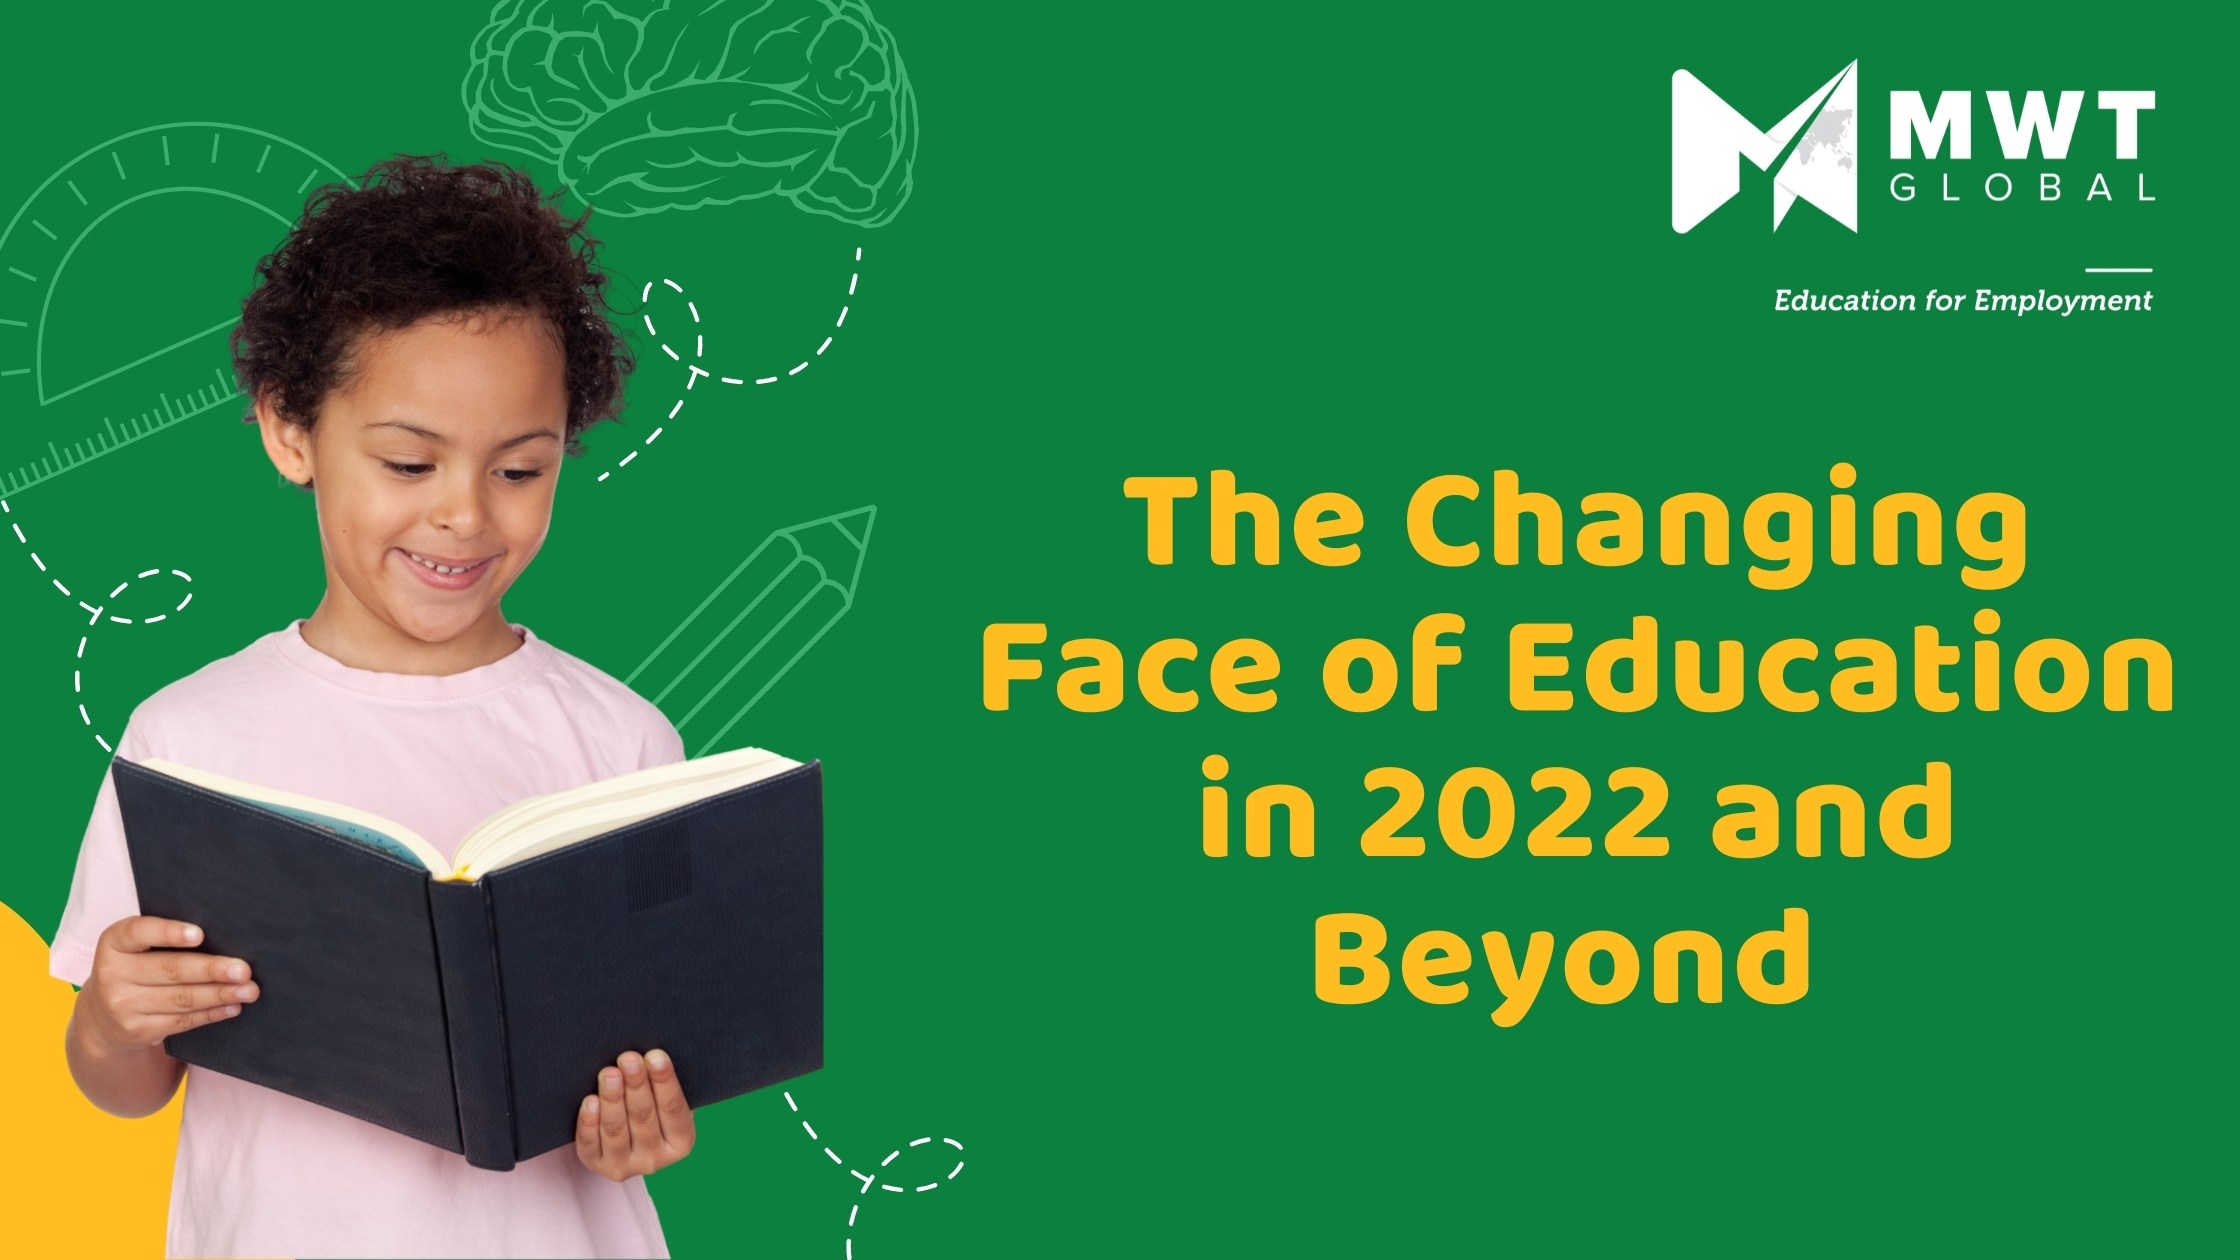 The Changing Face of Education in 2022 and Beyond